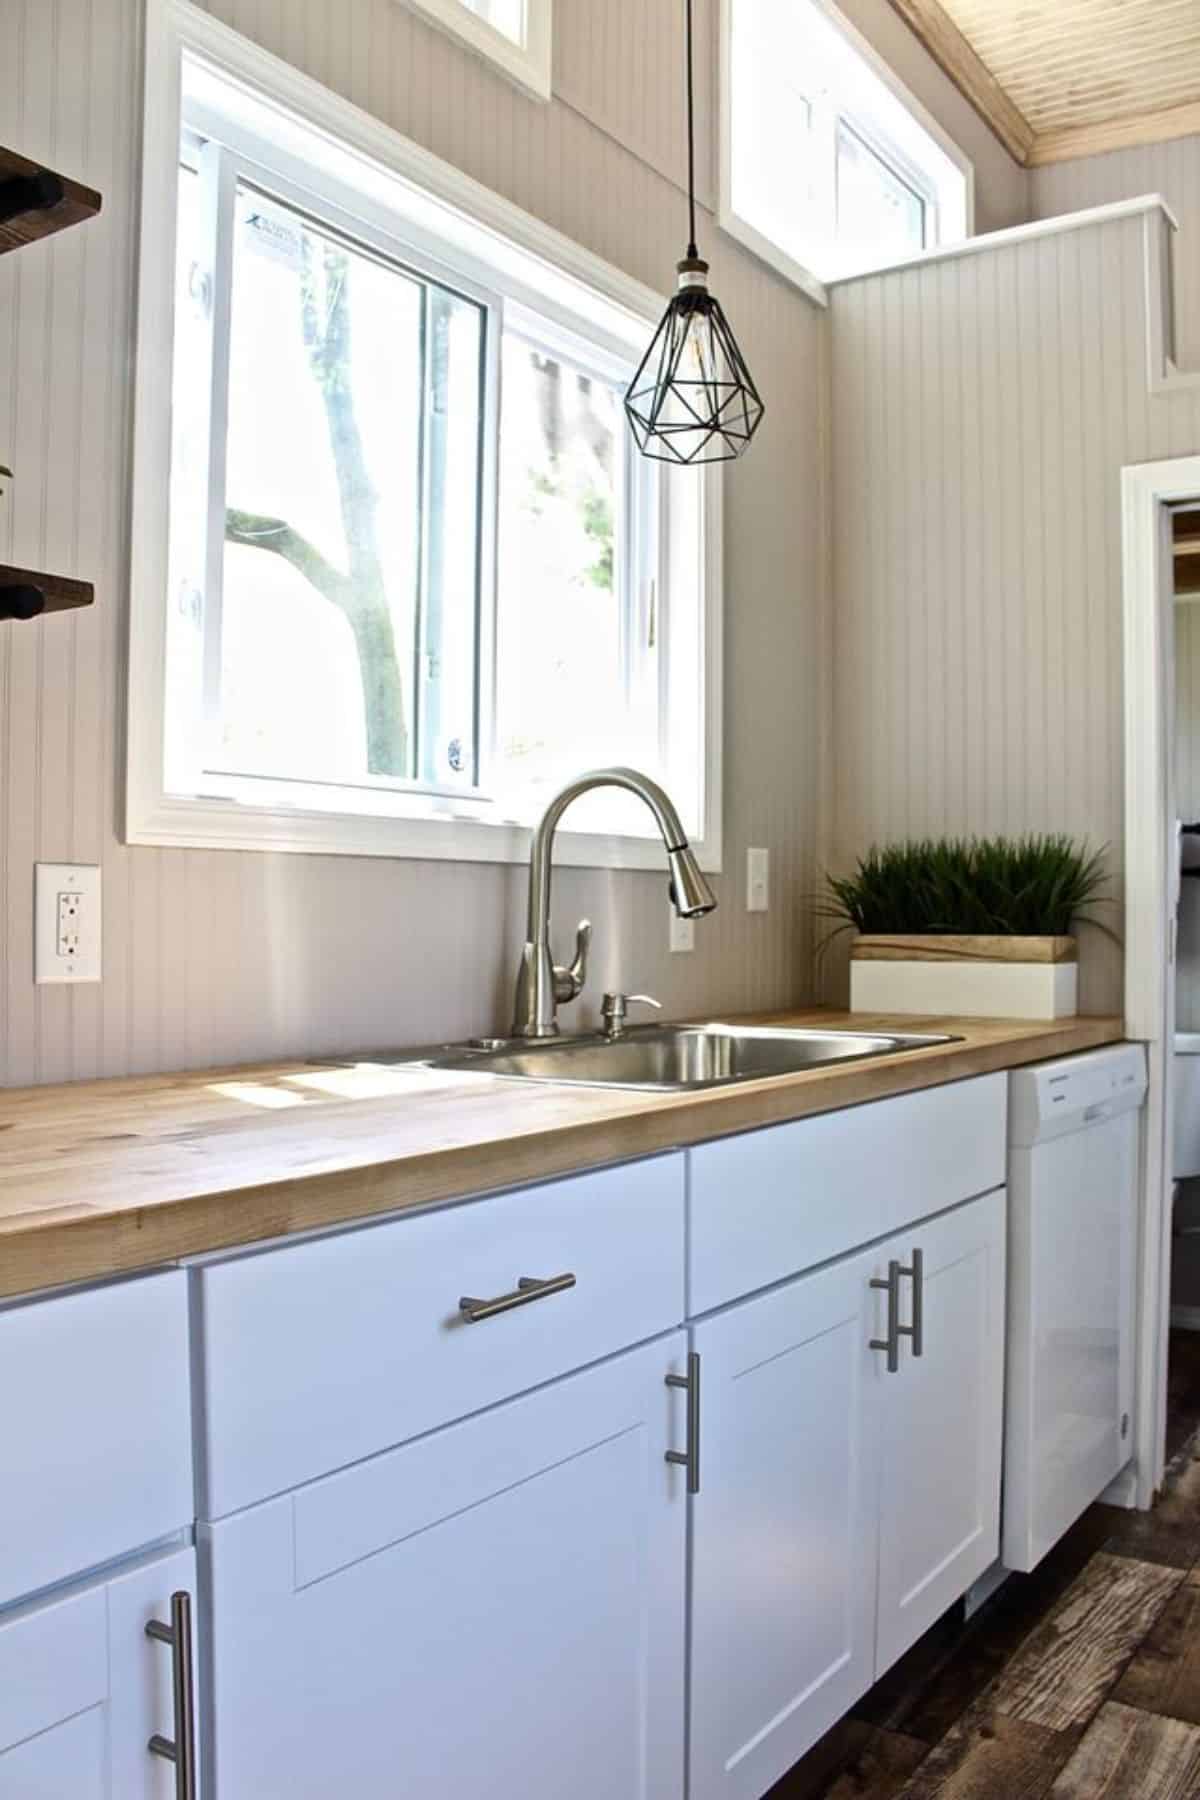 Sink with cabinets in kitchen area of NOAH certified tiny home